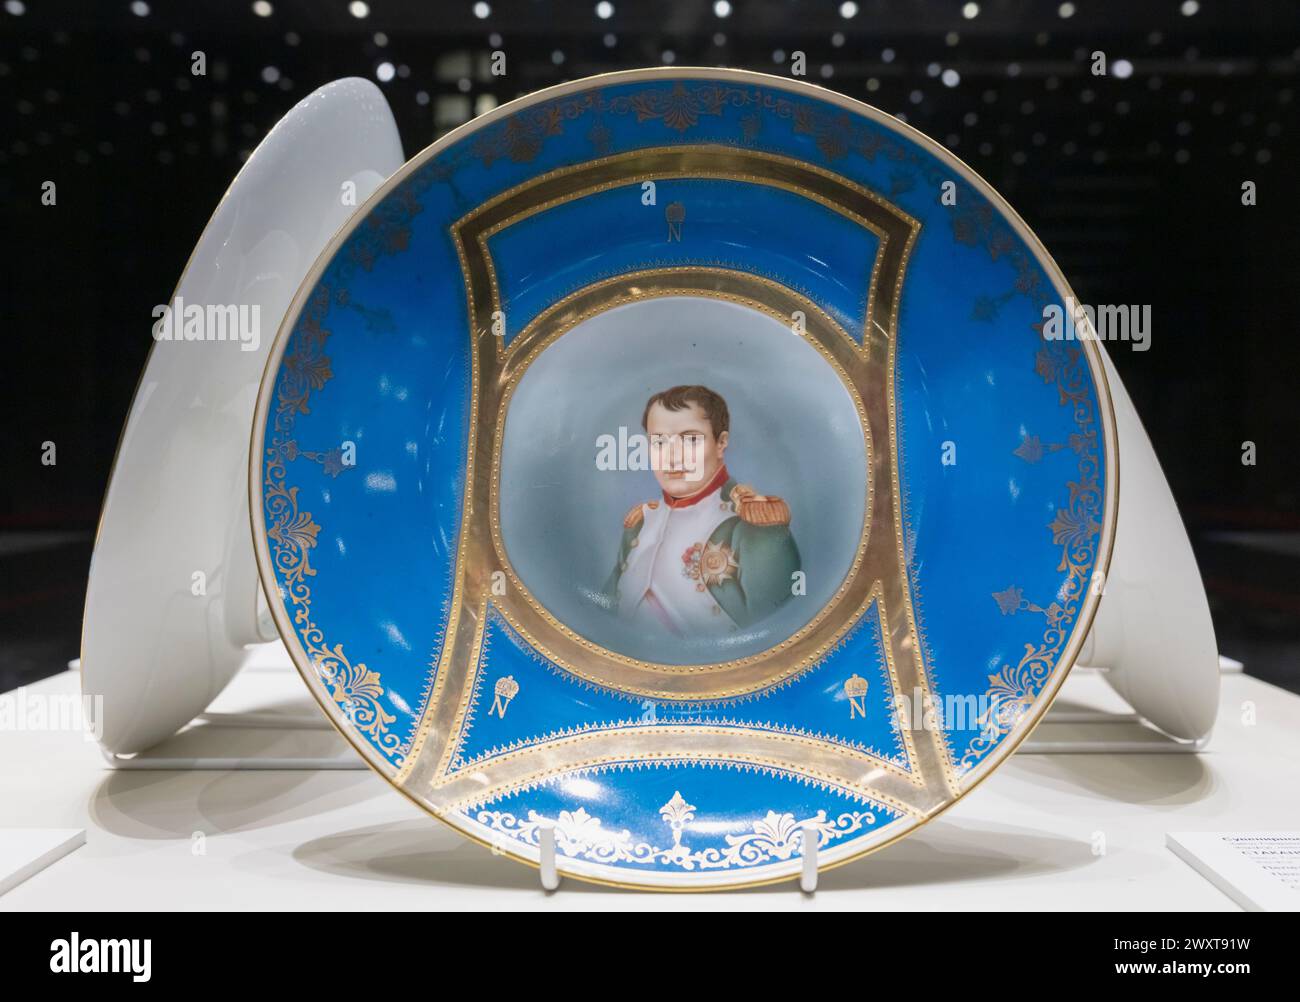 Vintage dish with portrait of Napoleon Bonaparte, Moscow, State Historical Museum, Russia Stock Photo